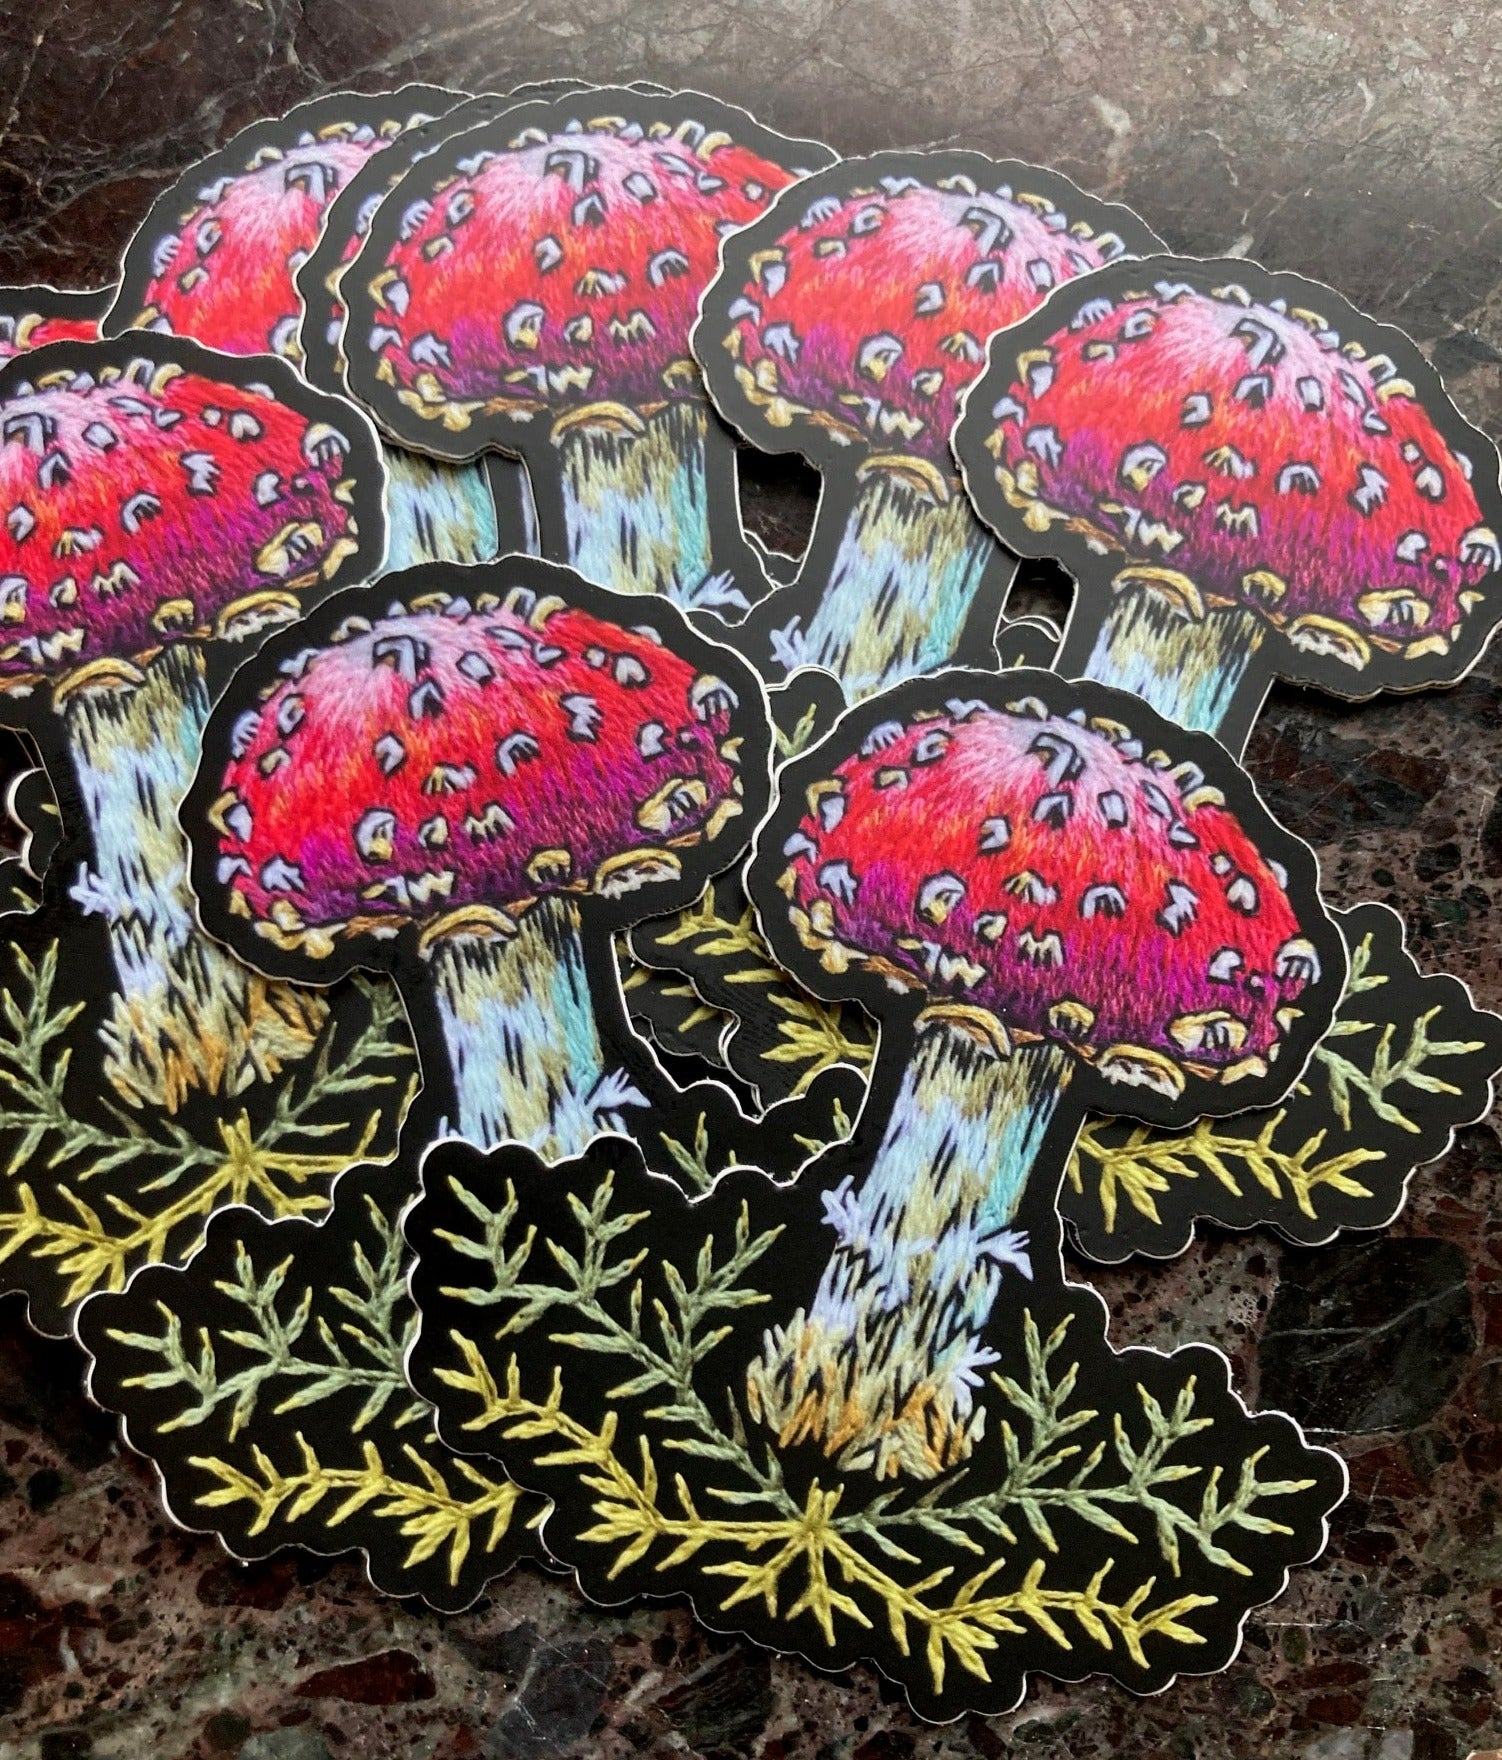 a pile of stickers sits on a dark surface. The stickers depict an embroidery of a mushroom with a red cap and white spots above some decorative stitched green moss. 